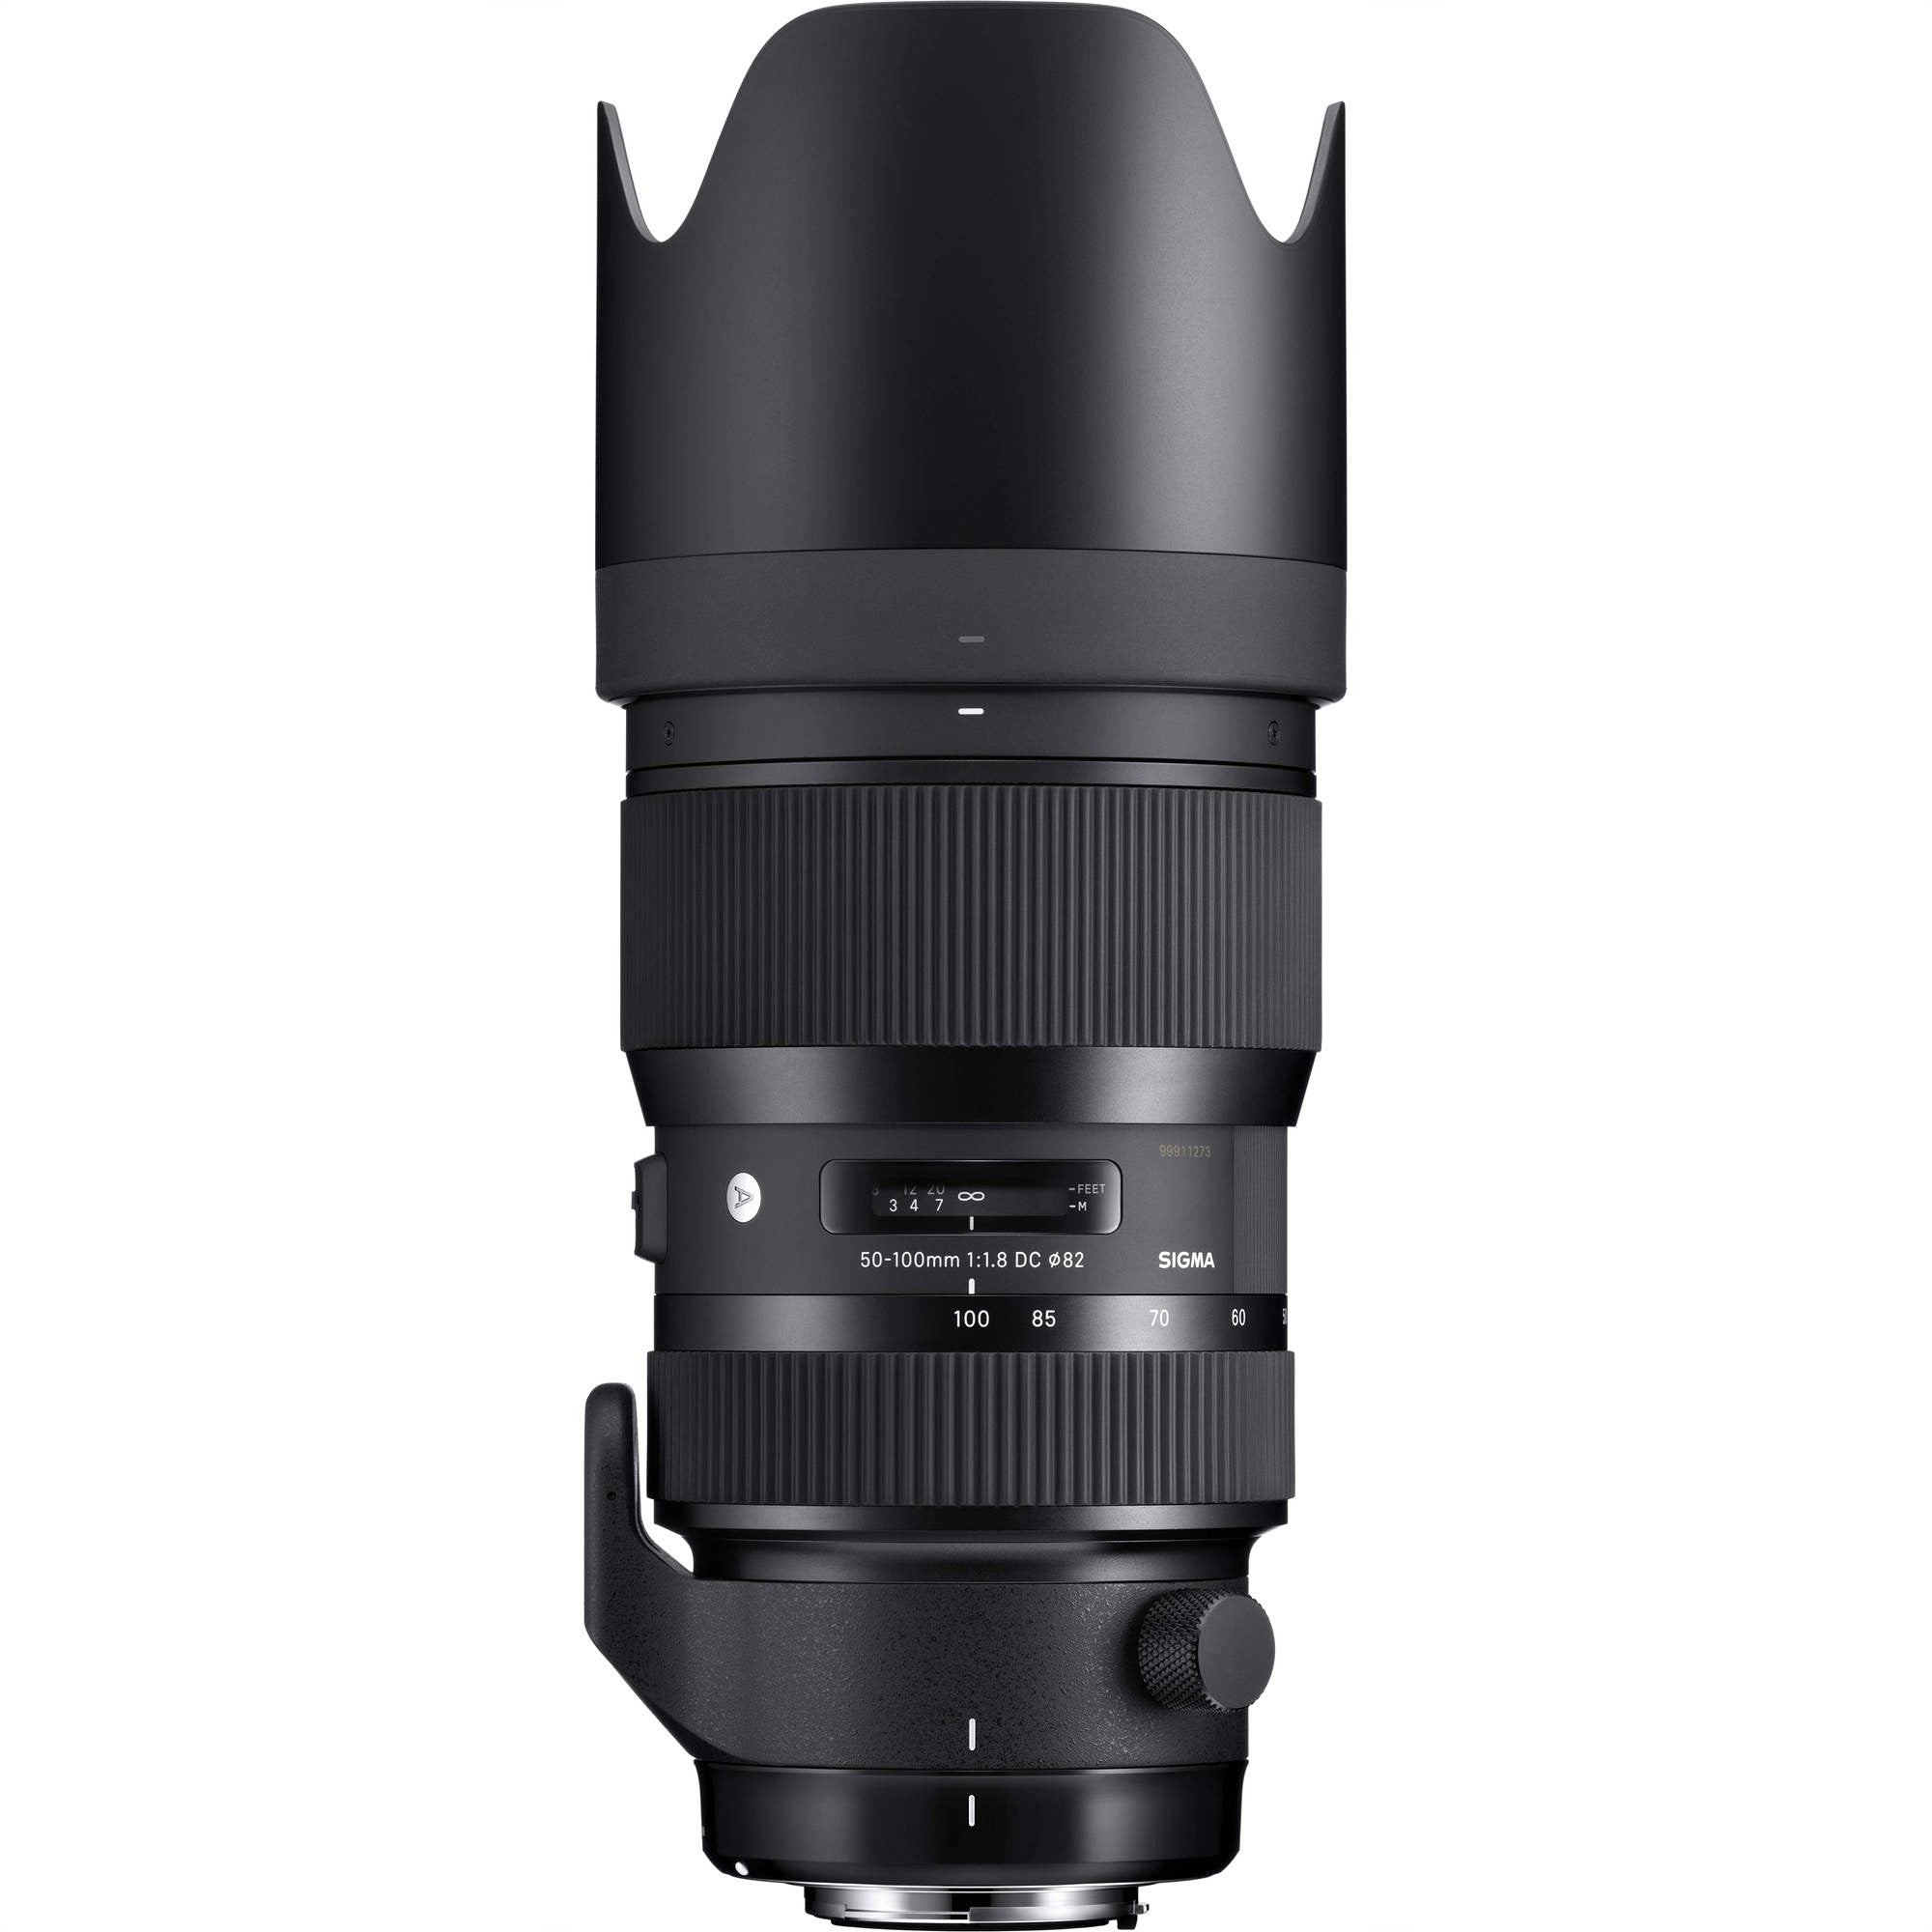 Sigma Lens Hood Attached to 50-100mm F1.8 DC HSM Art Lens